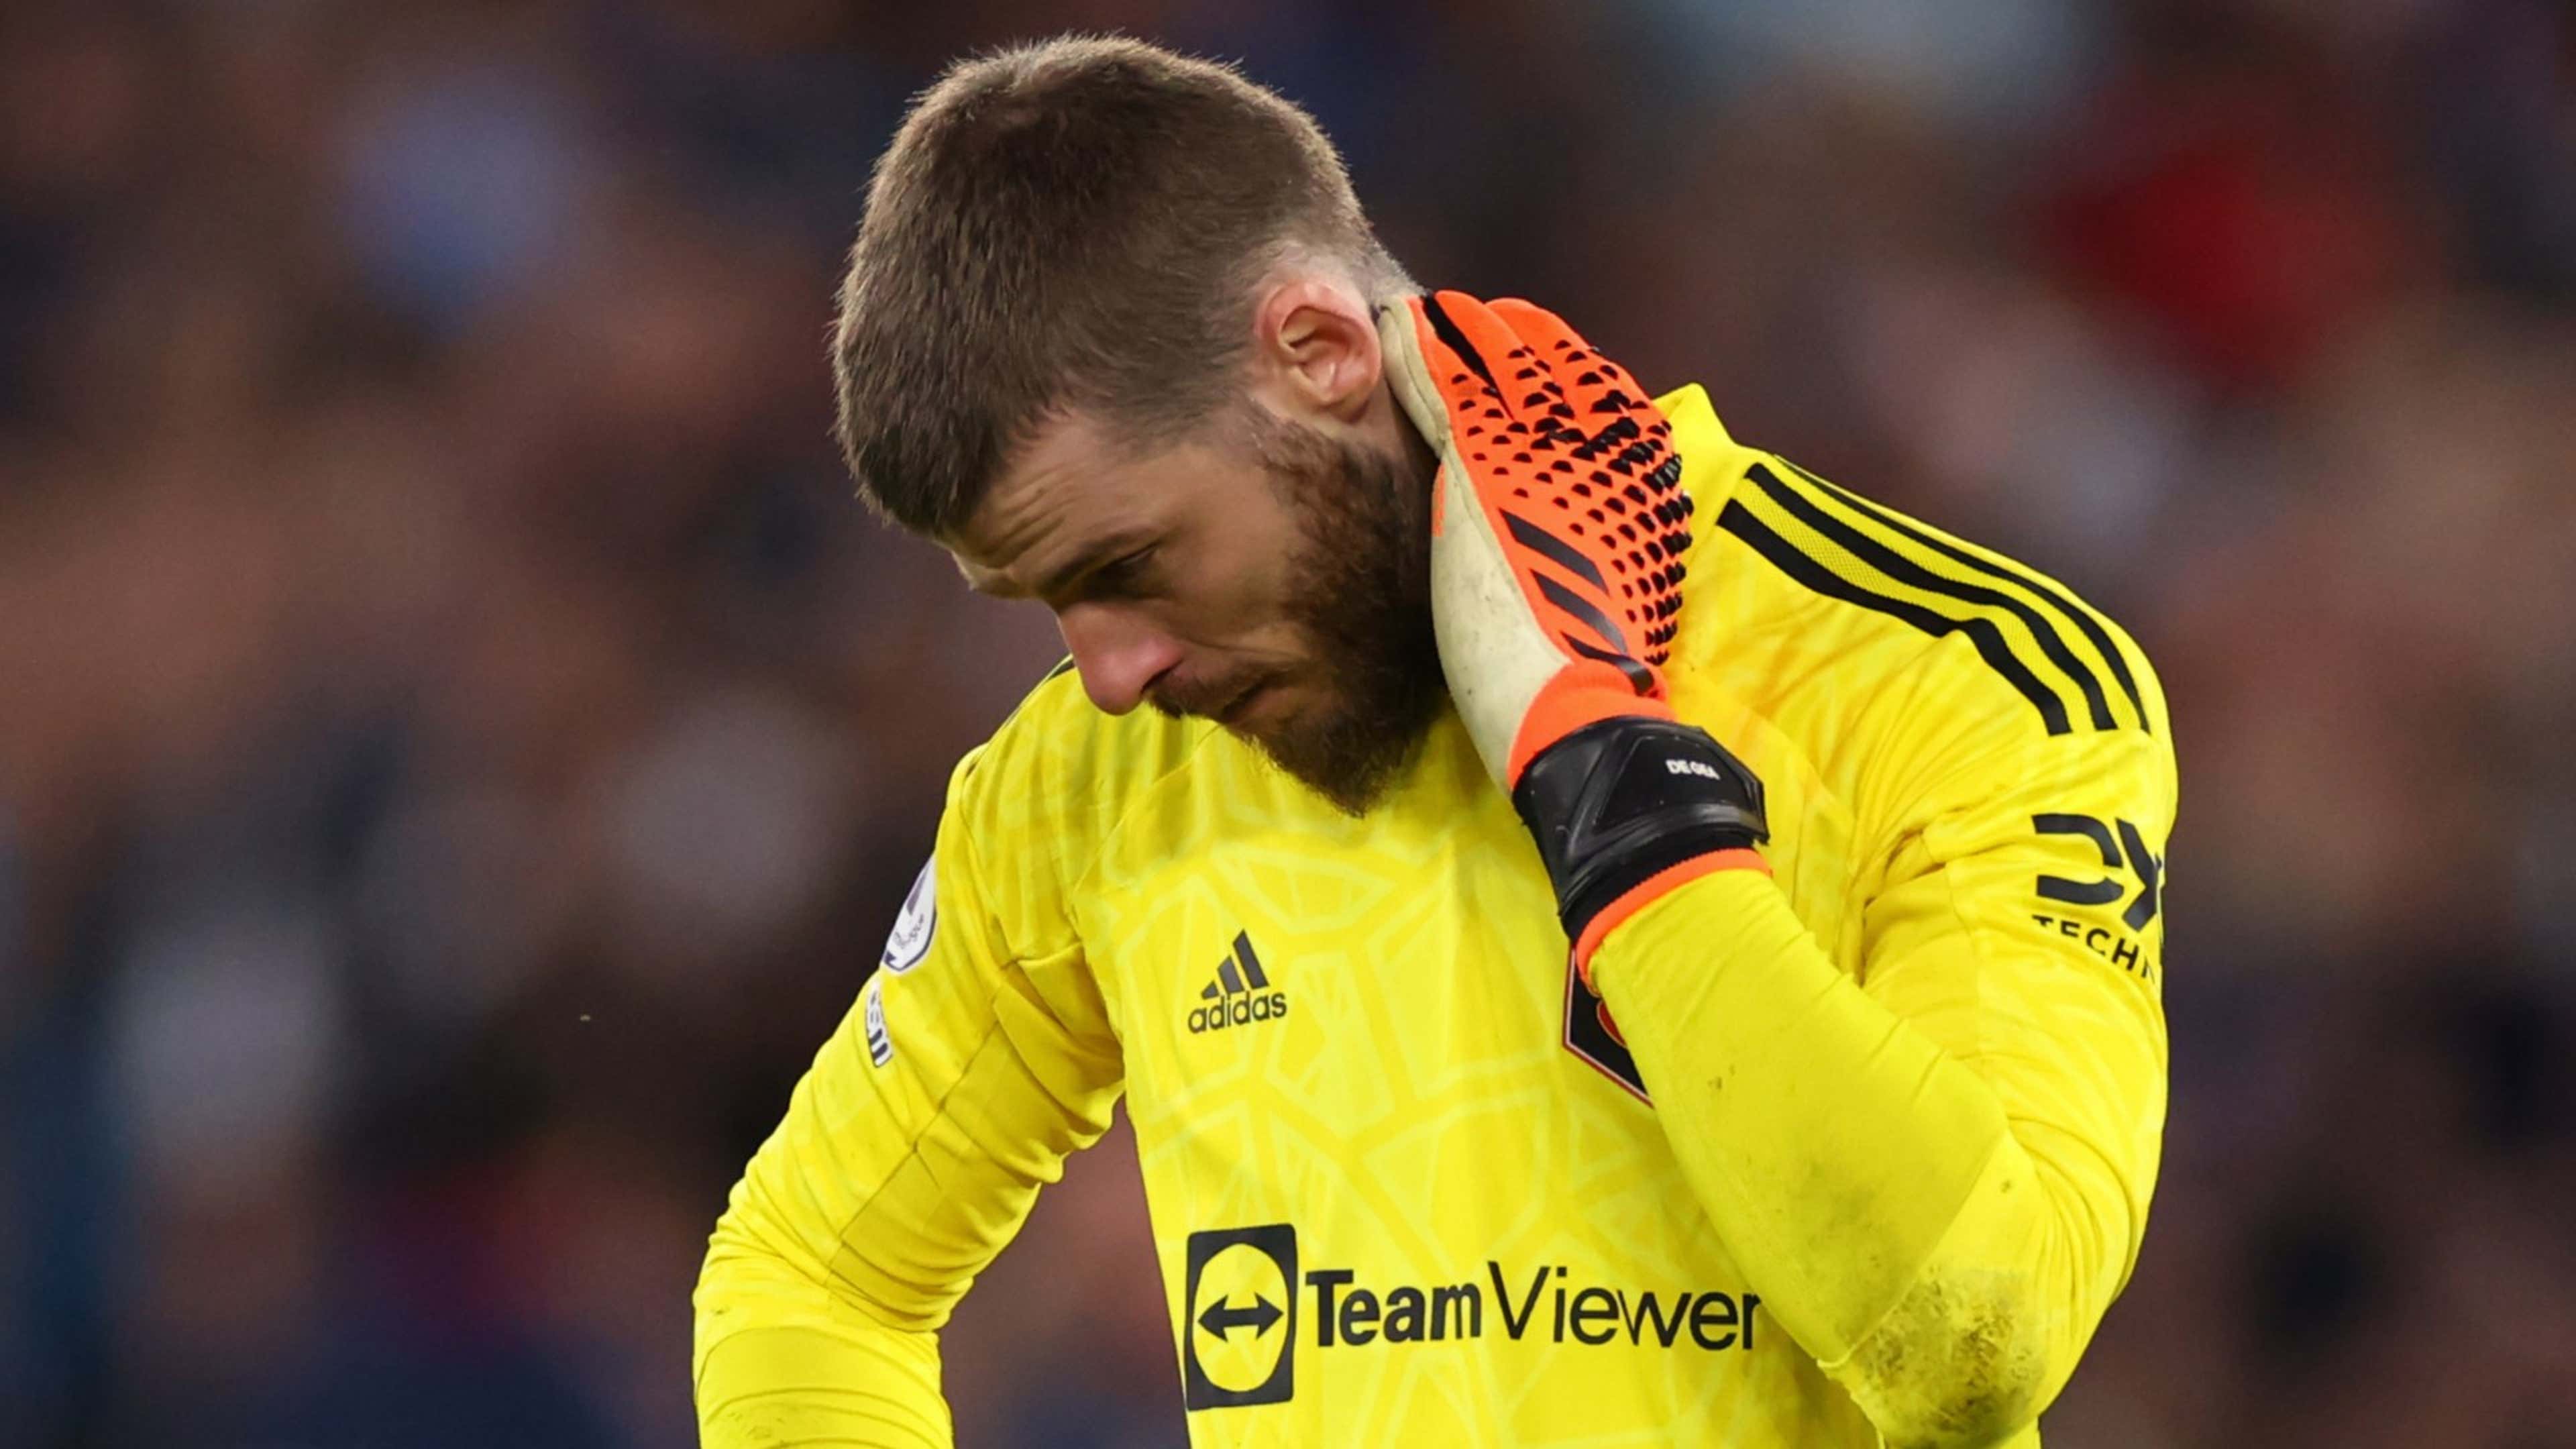 Explained: Why David de Gea is yet to find a new club after Man Utd exit as decision to live in Spain with wife Edurne Garcia puts pay to Saudi switch |